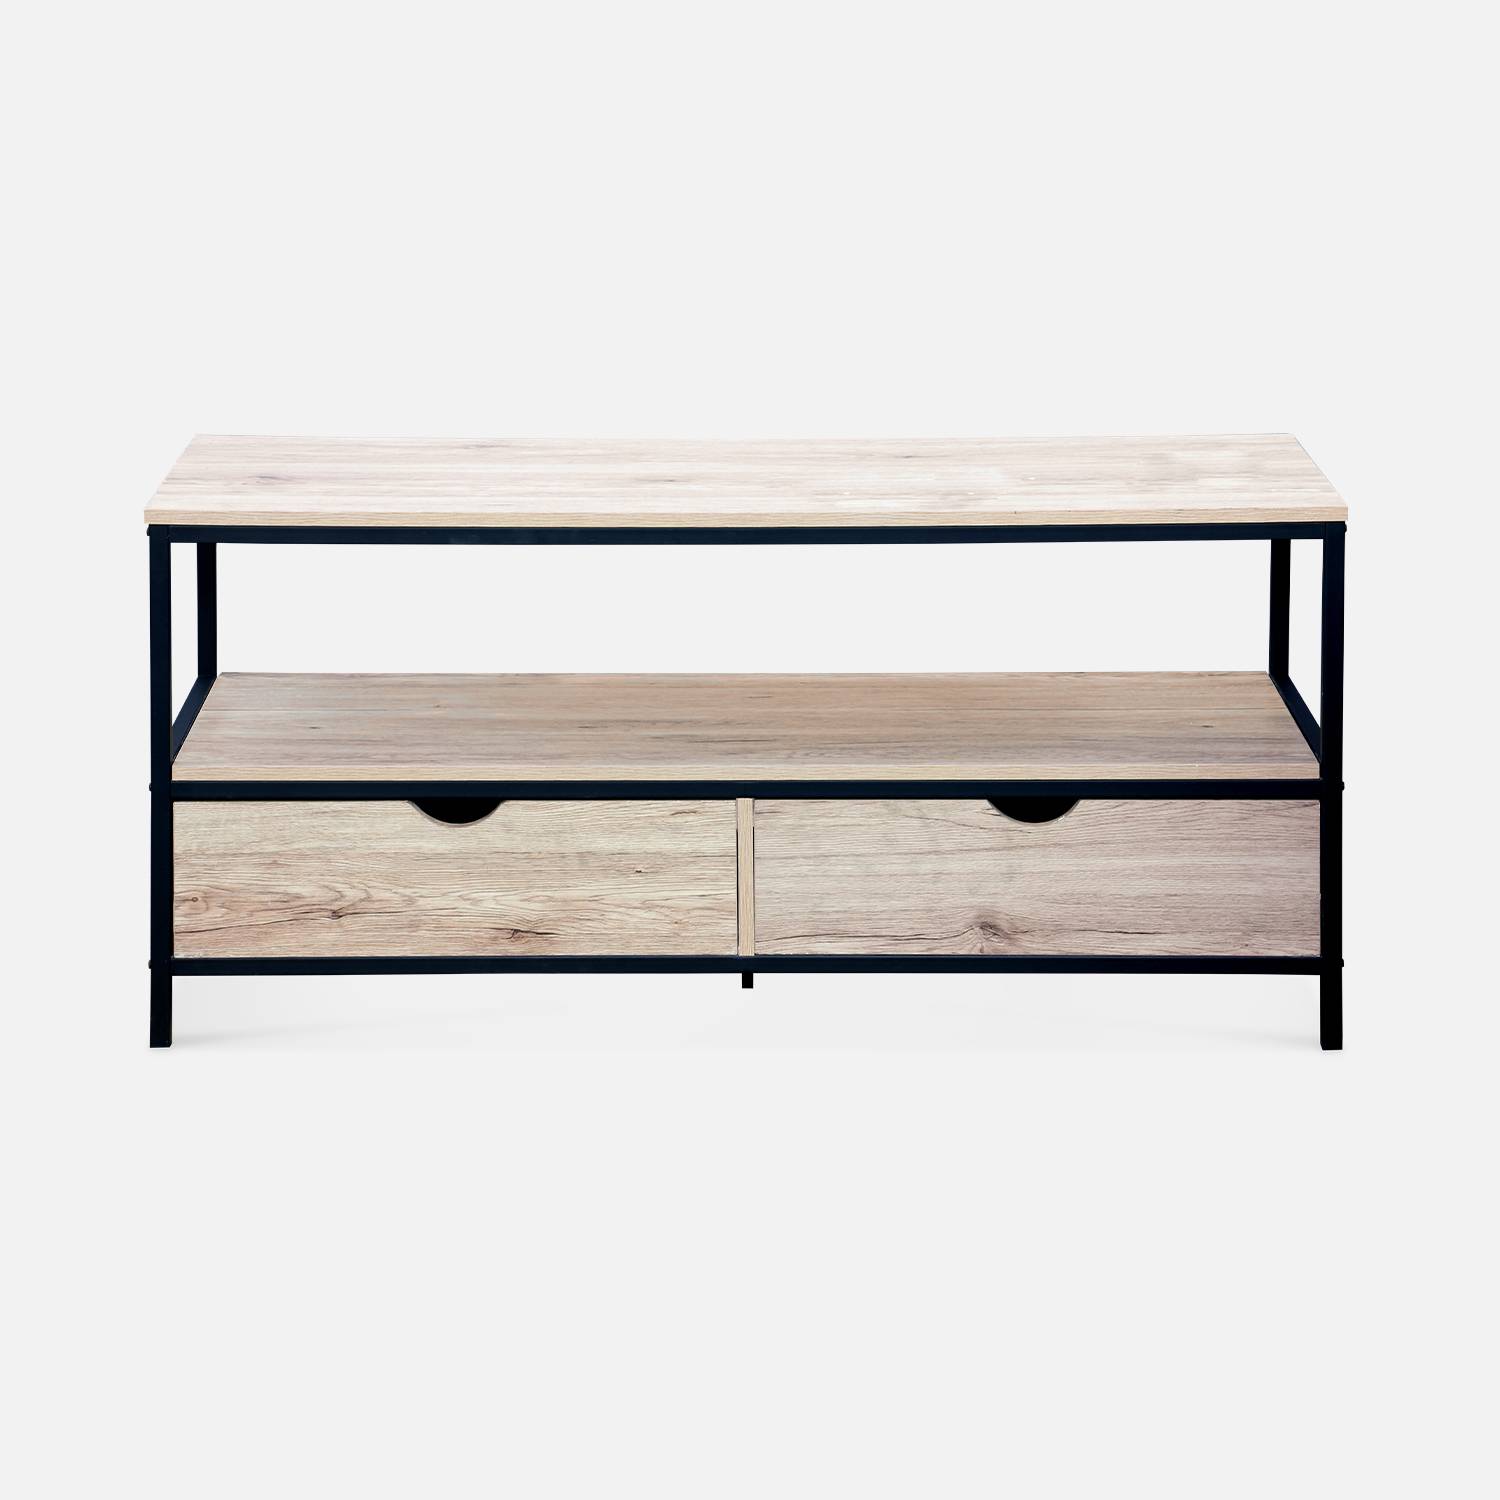 Industrial metal and wood effect TV stand with 2 drawers, 20x39x57cm - Loft - Black,sweeek,Photo6